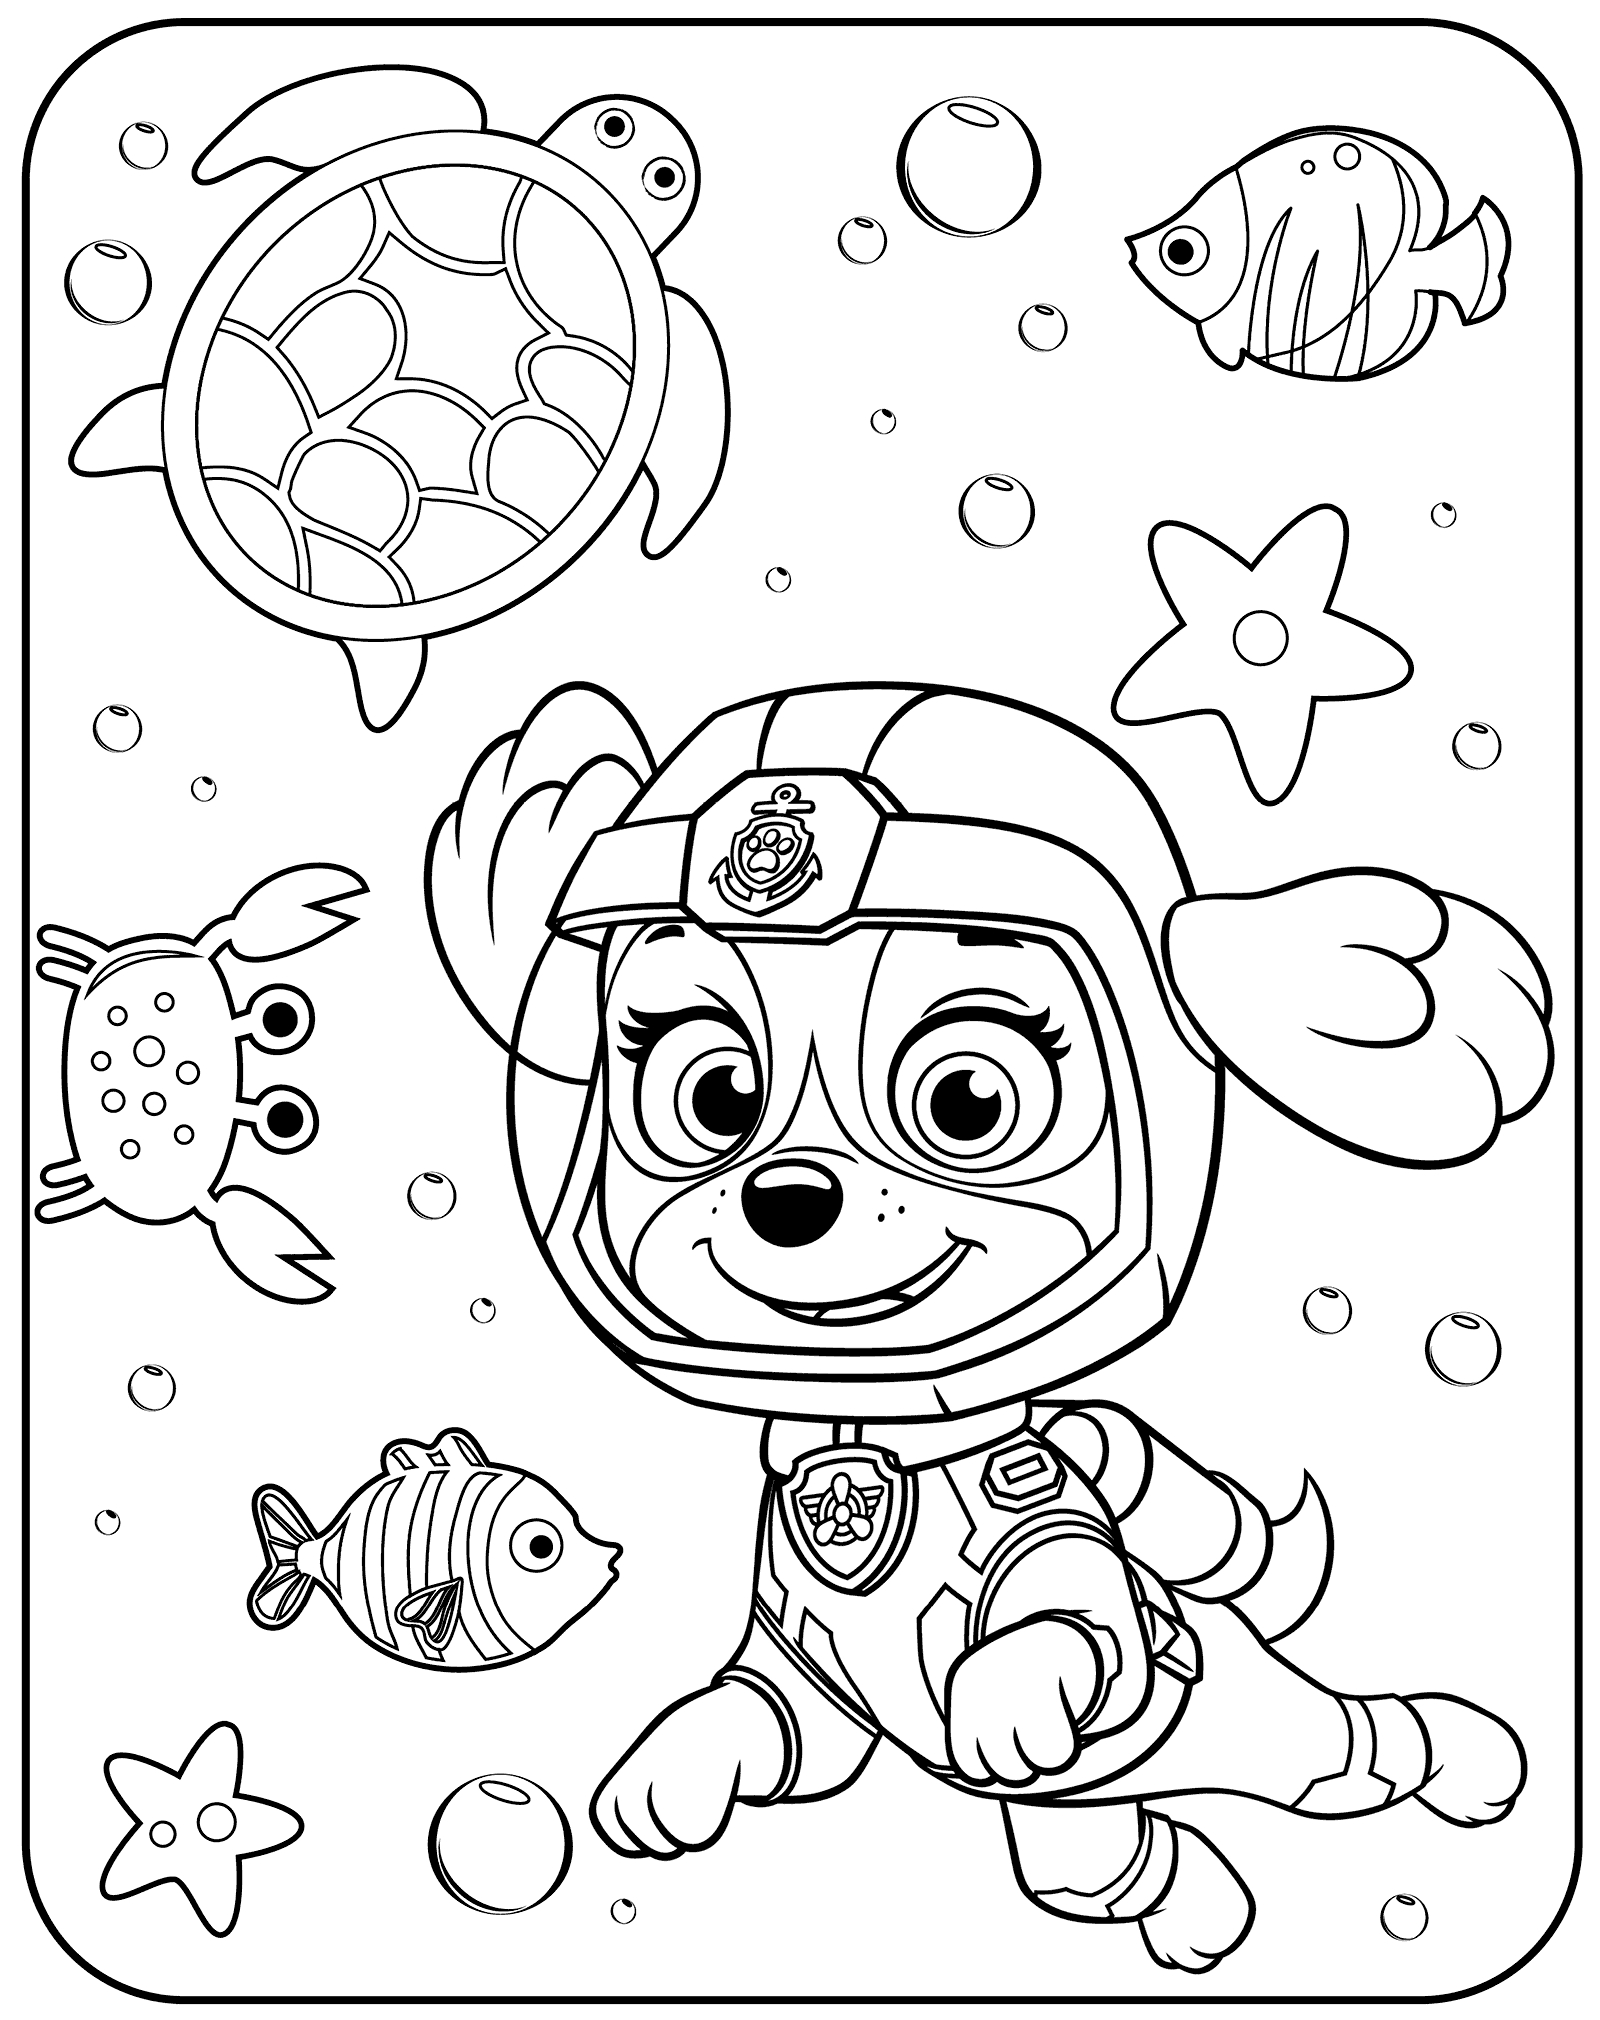 Paw Patrol Characters Coloring Pages at Free